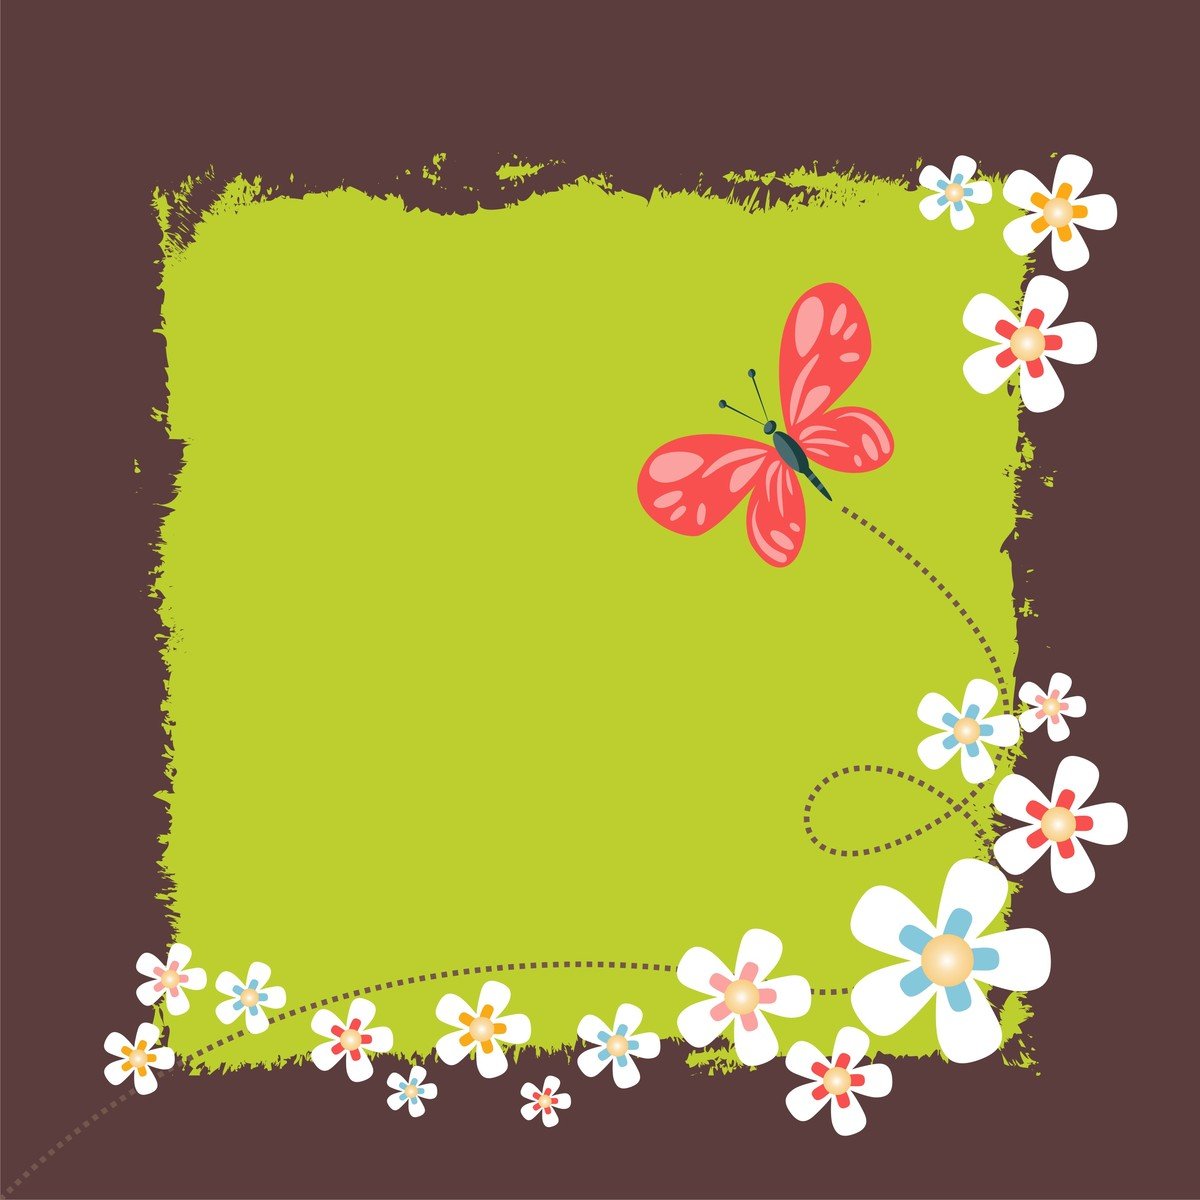 a green square frame with white flowers and a red erfly